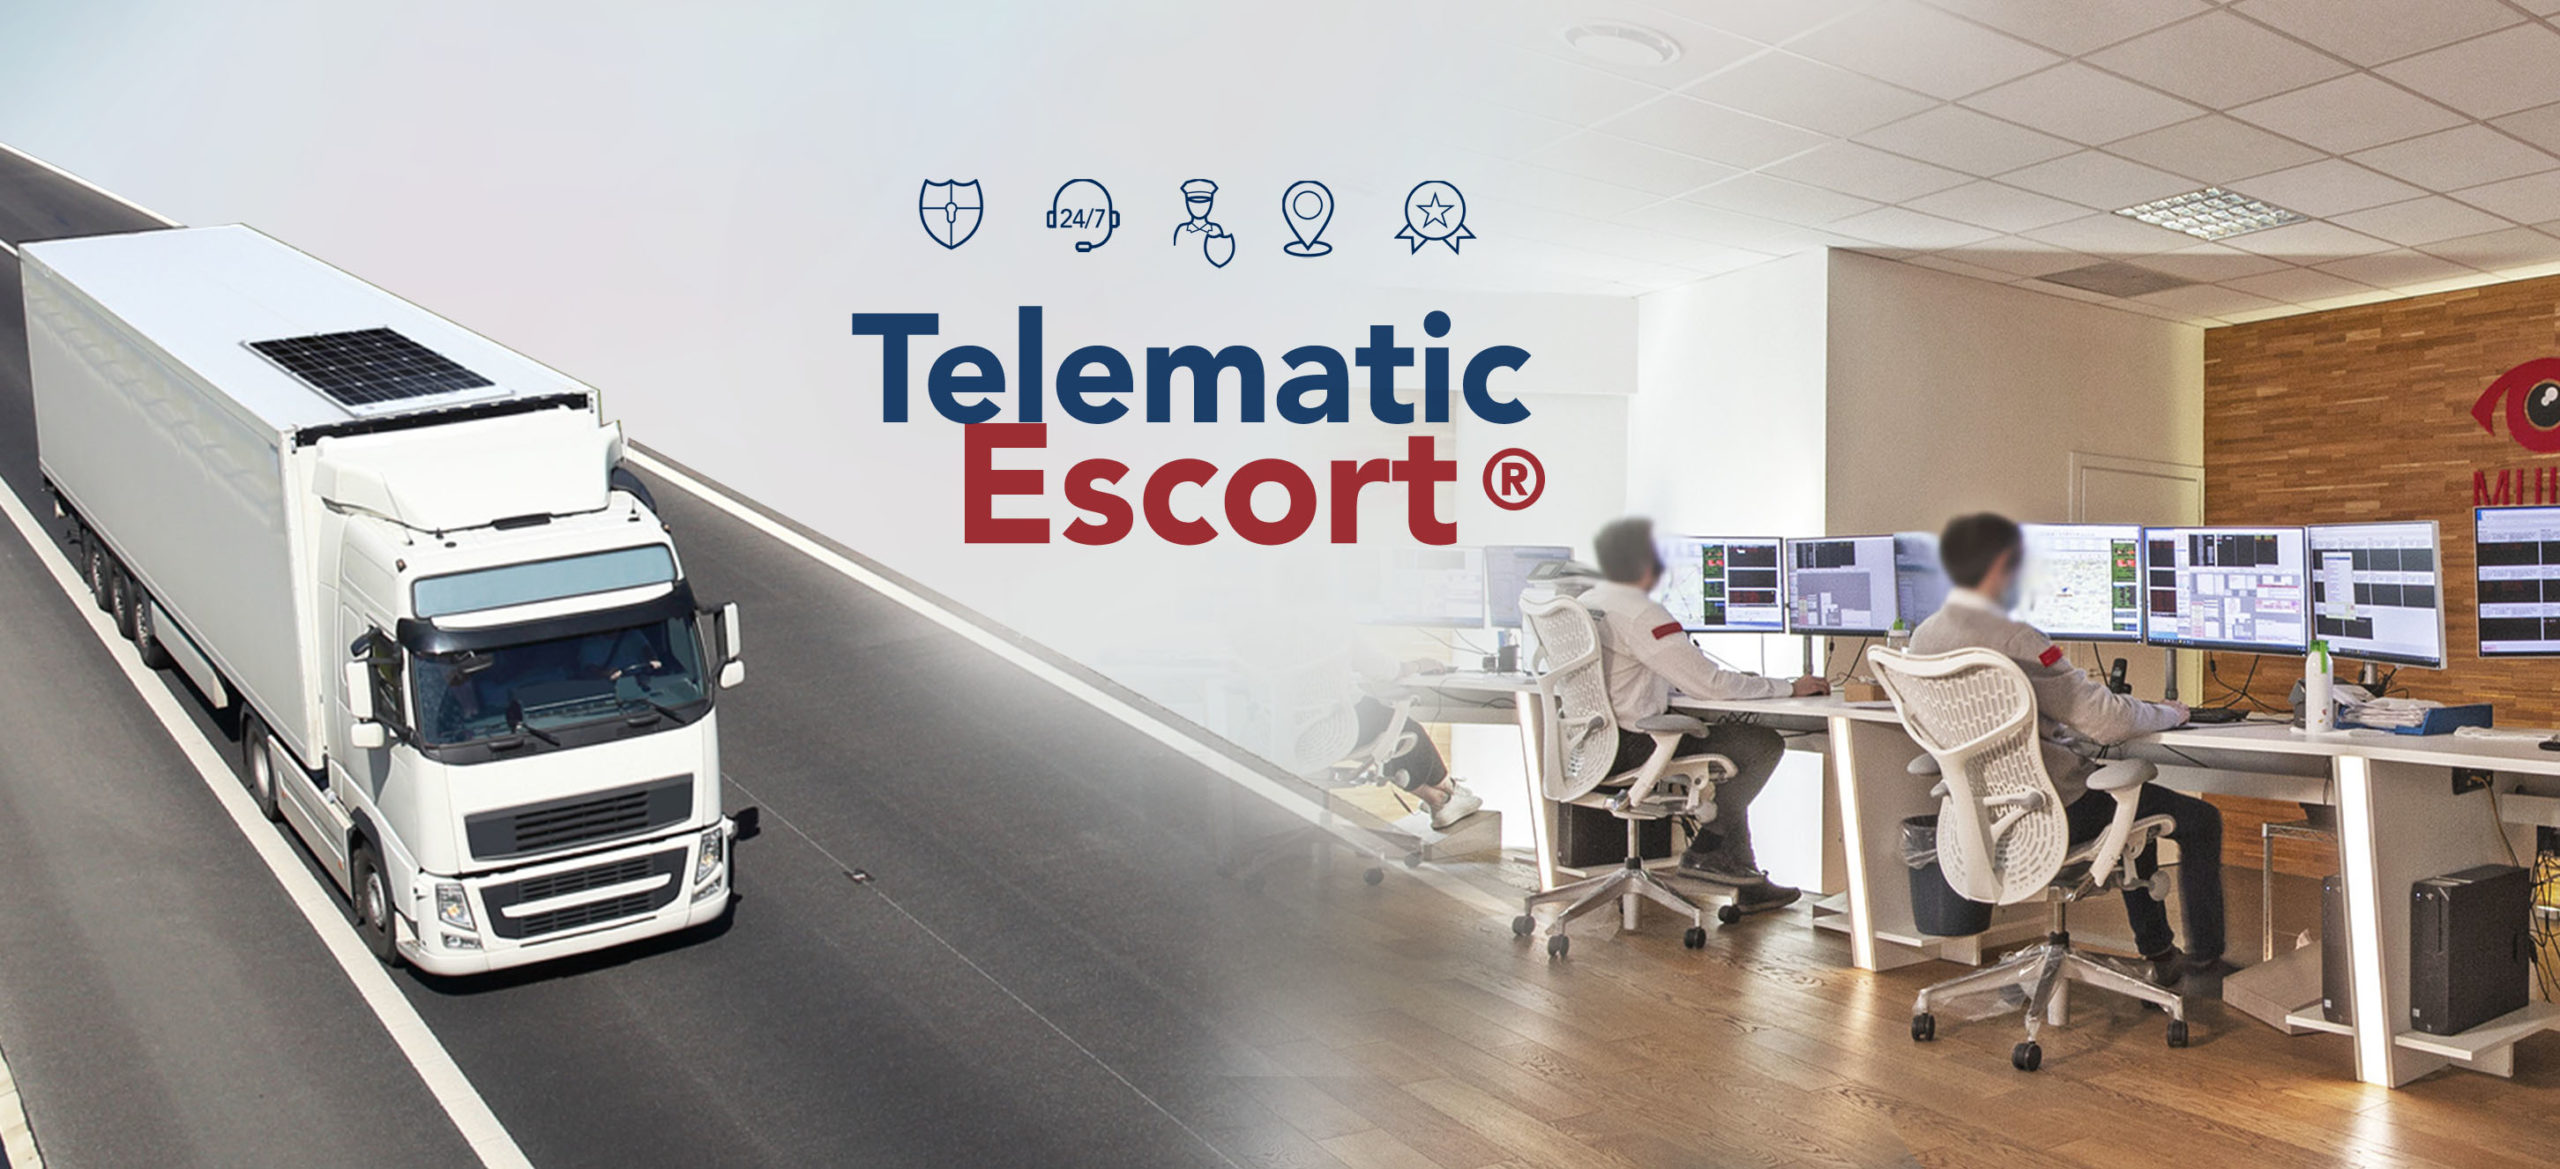 TELEMATIC ESCORT® BECOMES A REGISTERED TRADEMARK